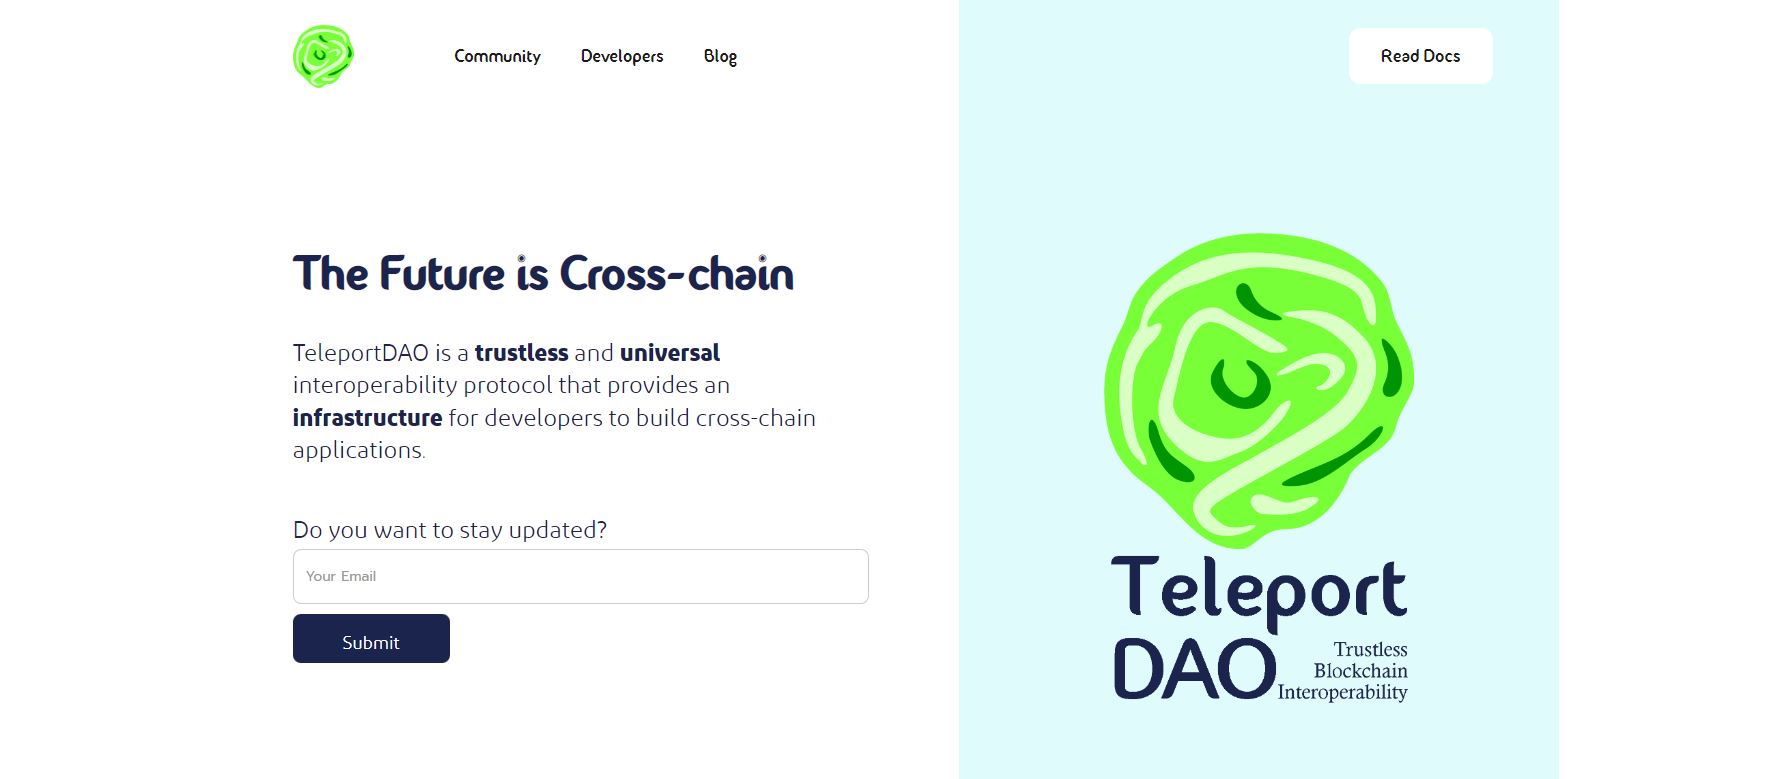 TeleportDAO is a software development startup that recently raised $2.5M in seed funding